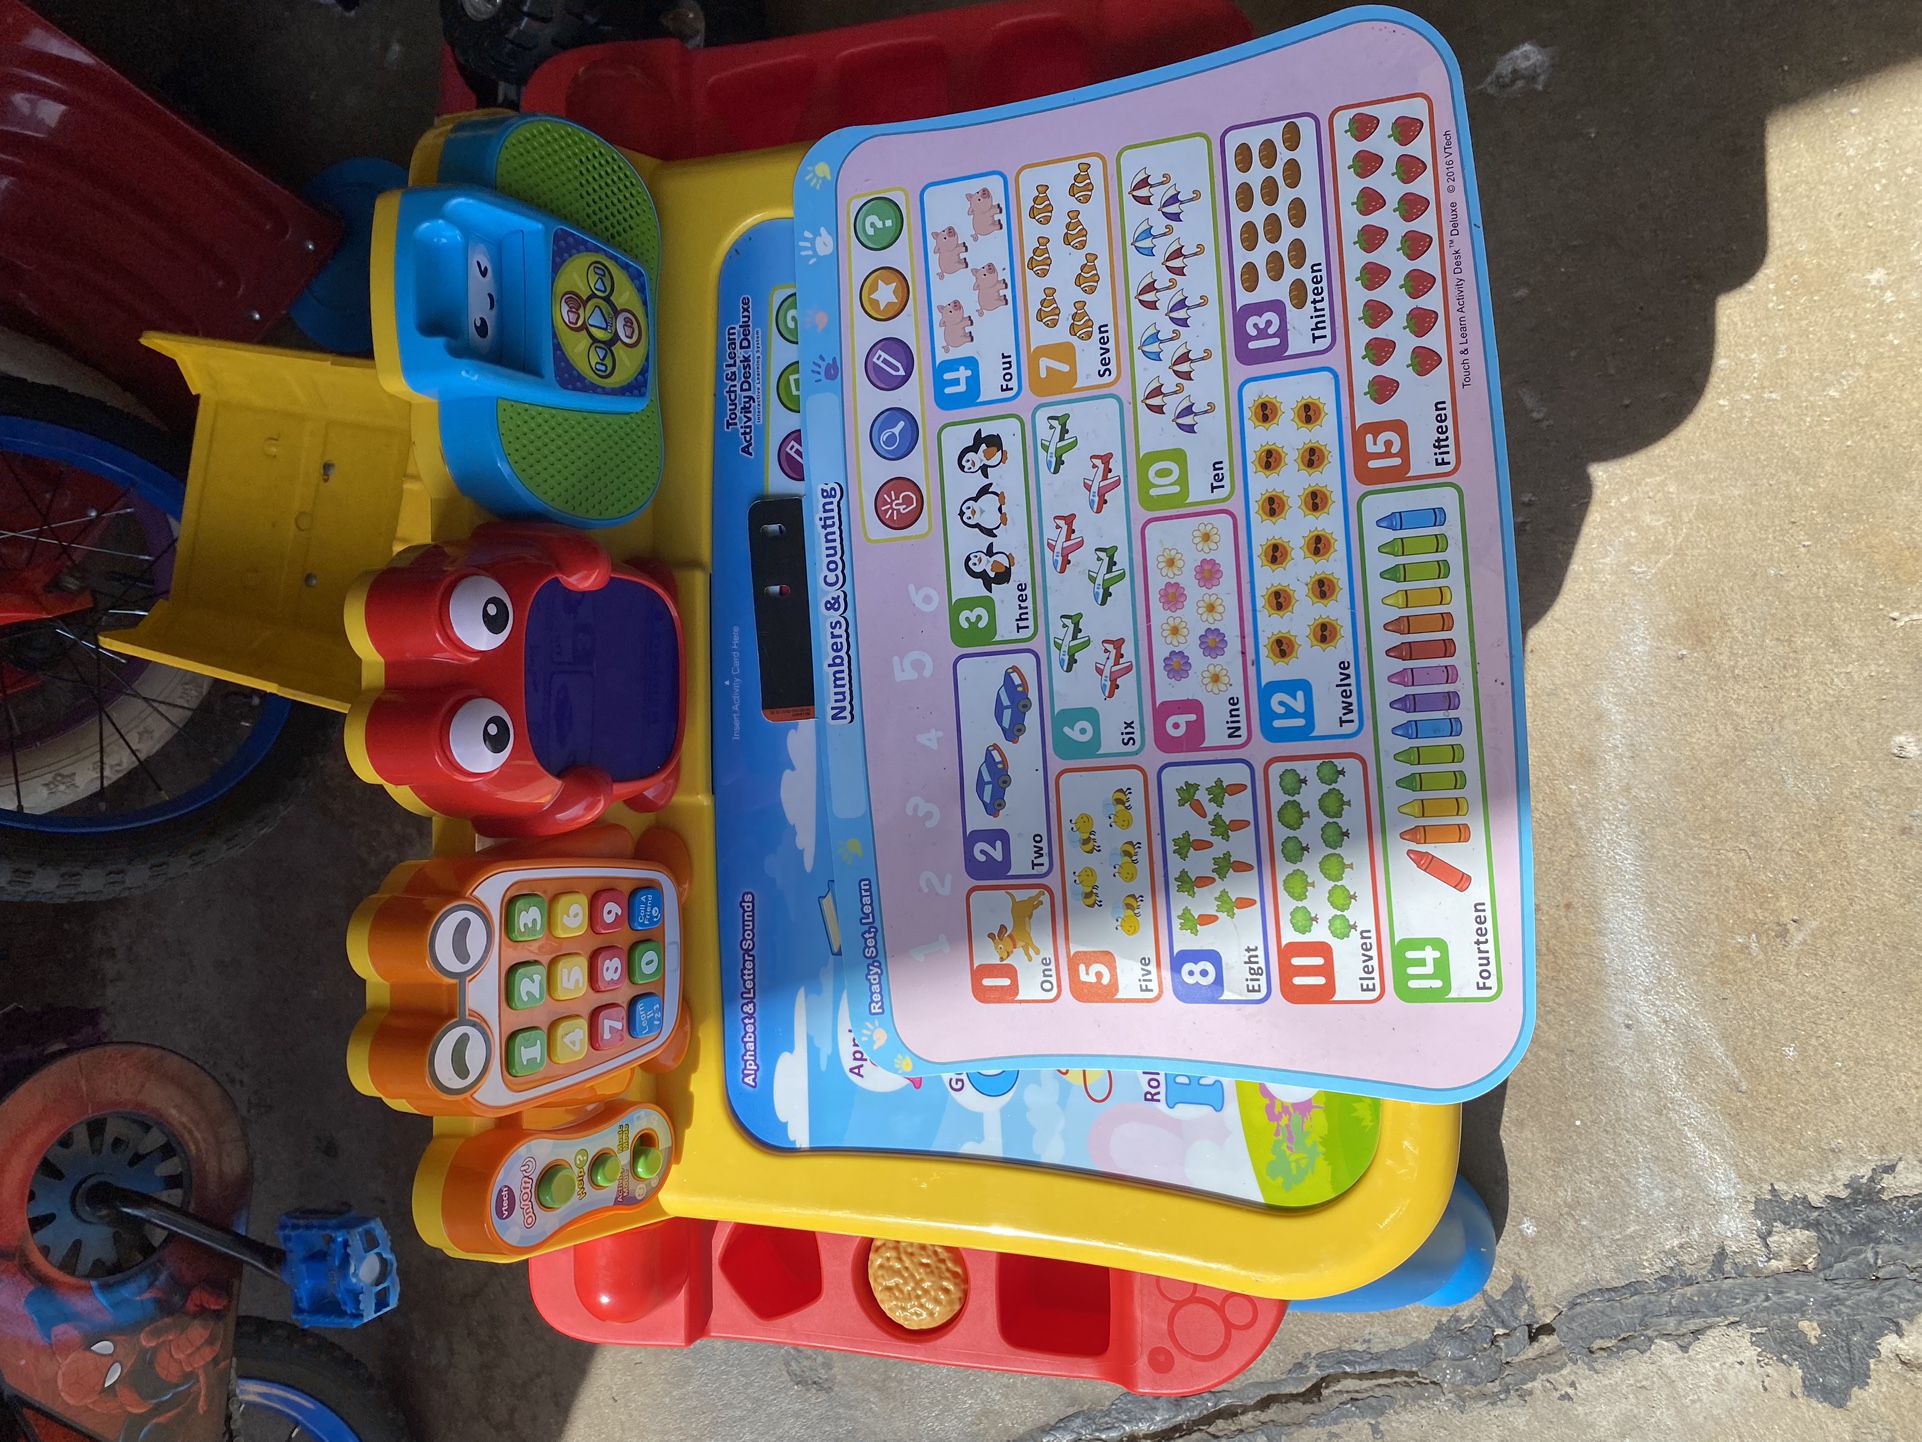 Kids Activity Table 